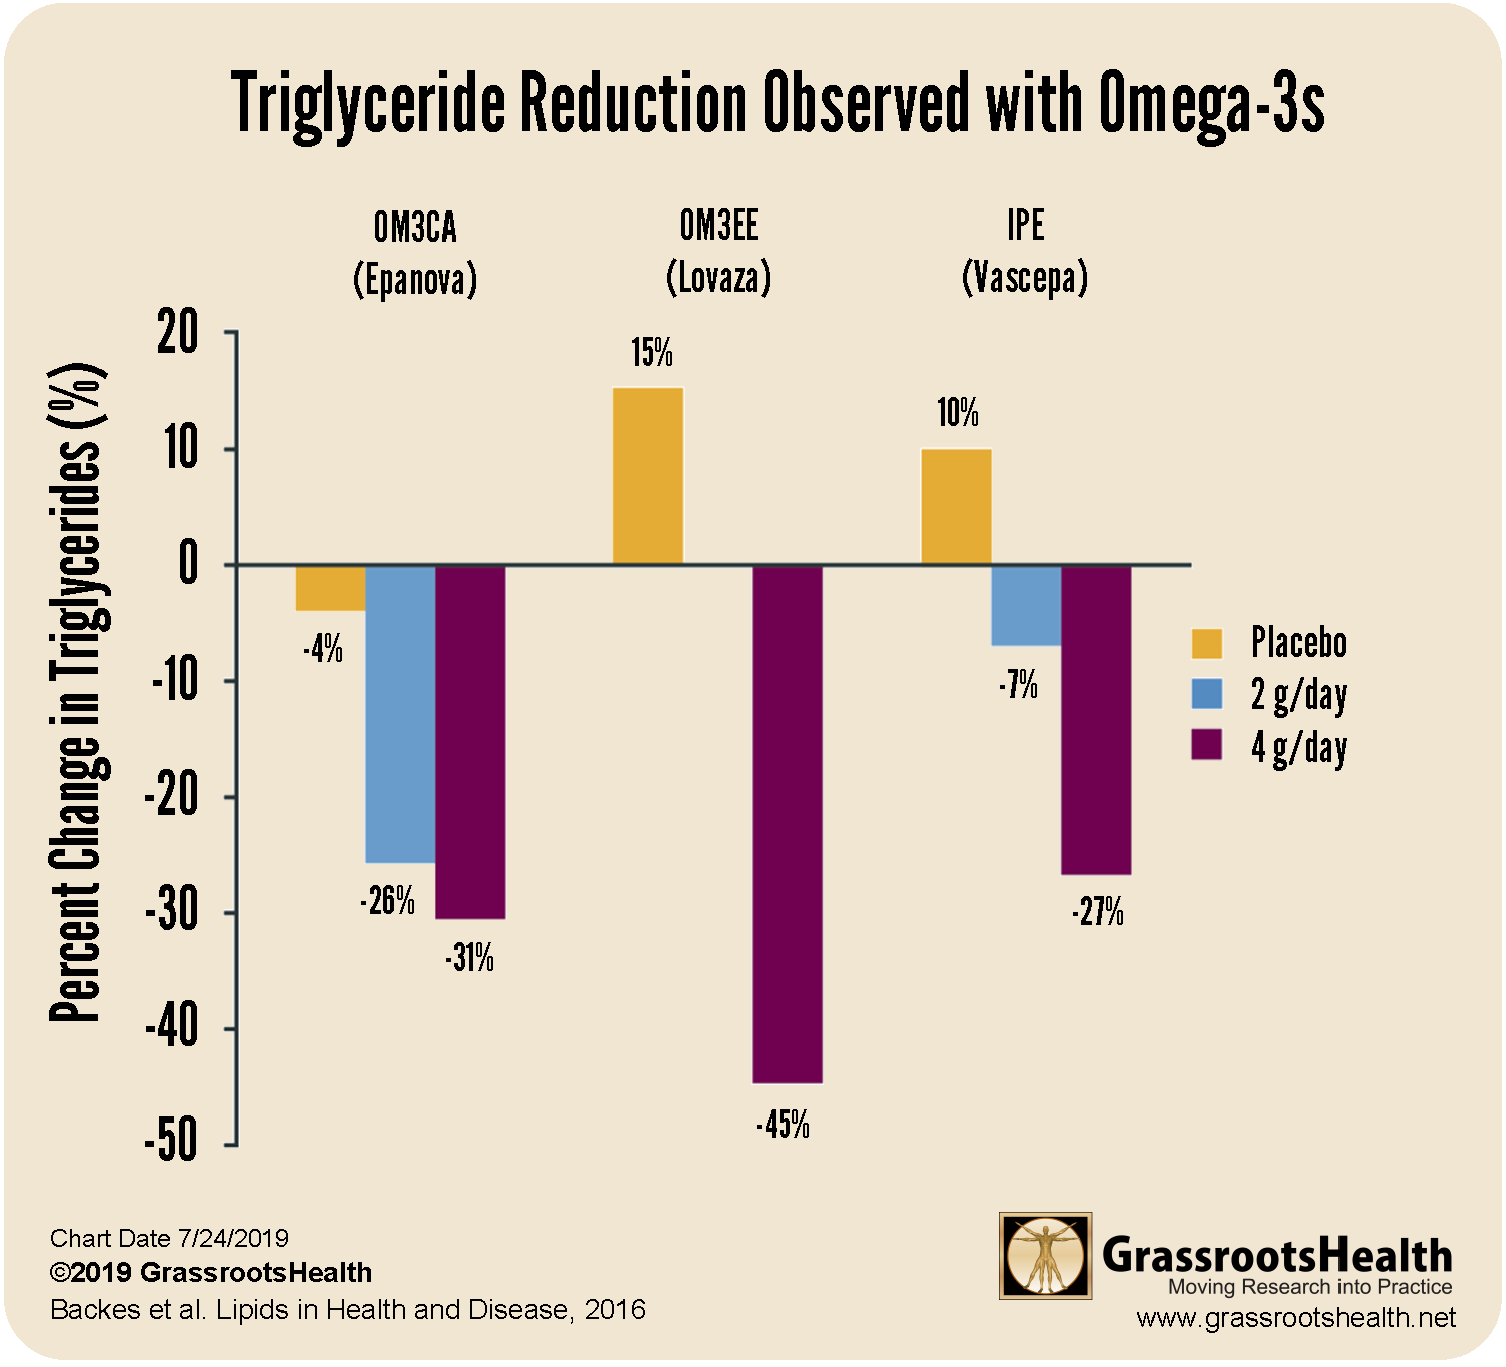 Reduced Triglyceride Levels with Omega